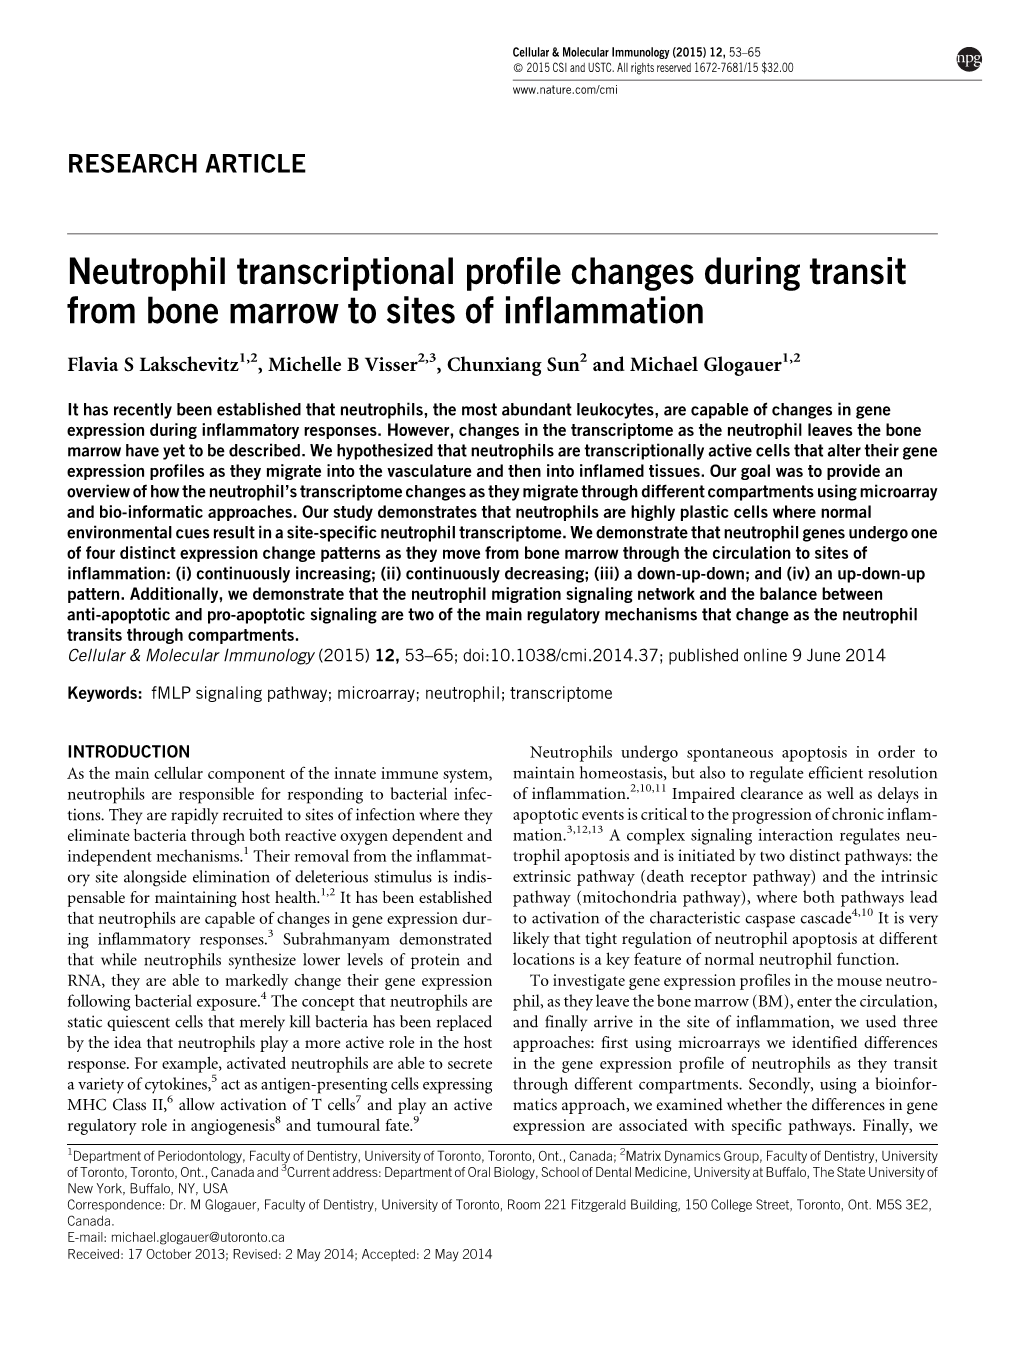 Neutrophil Transcriptional Profile Changes During Transit from Bone Marrow to Sites of Inflammation